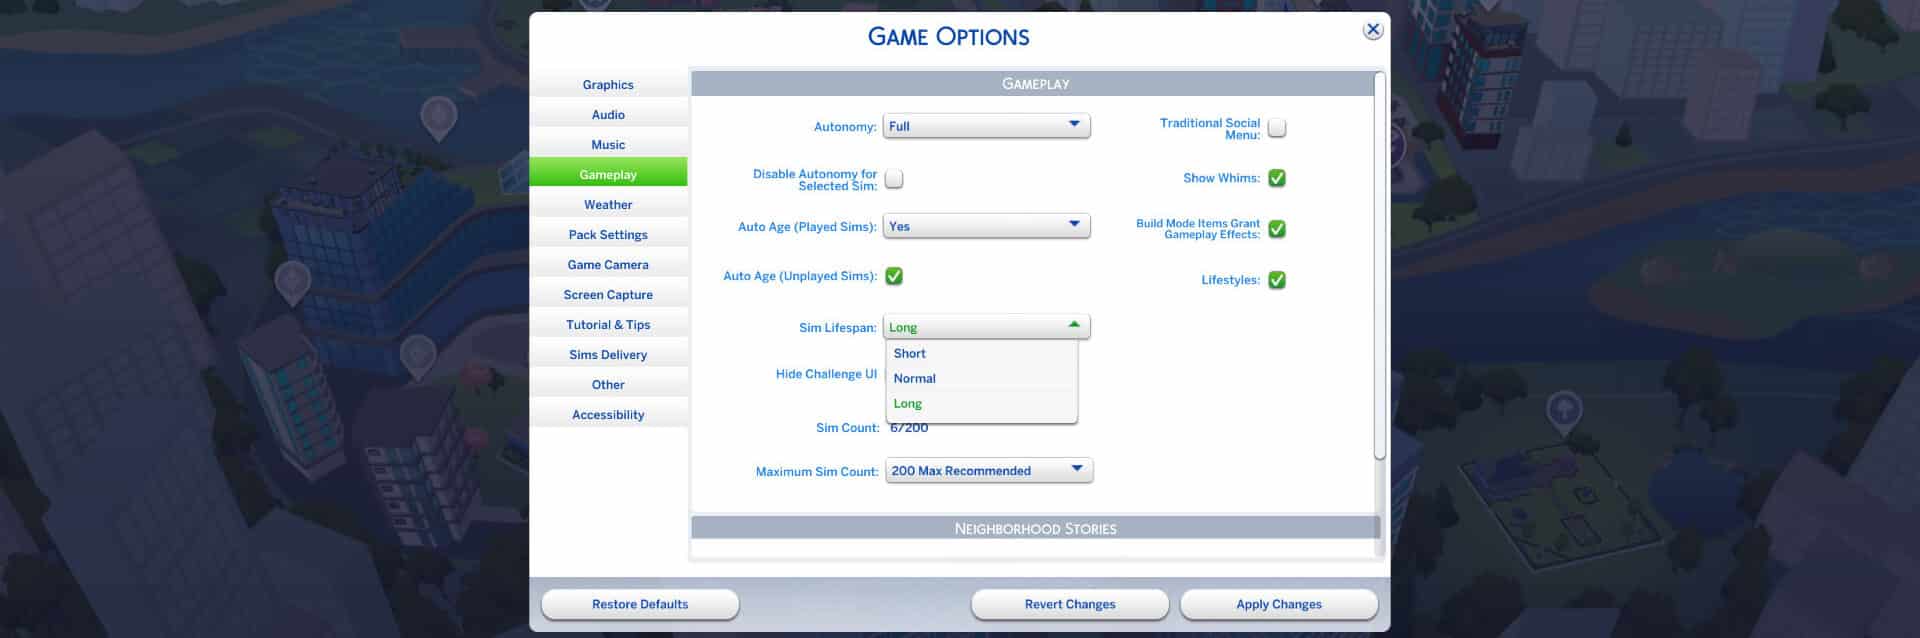 the sims 4 game options menu showing where lifespans are located